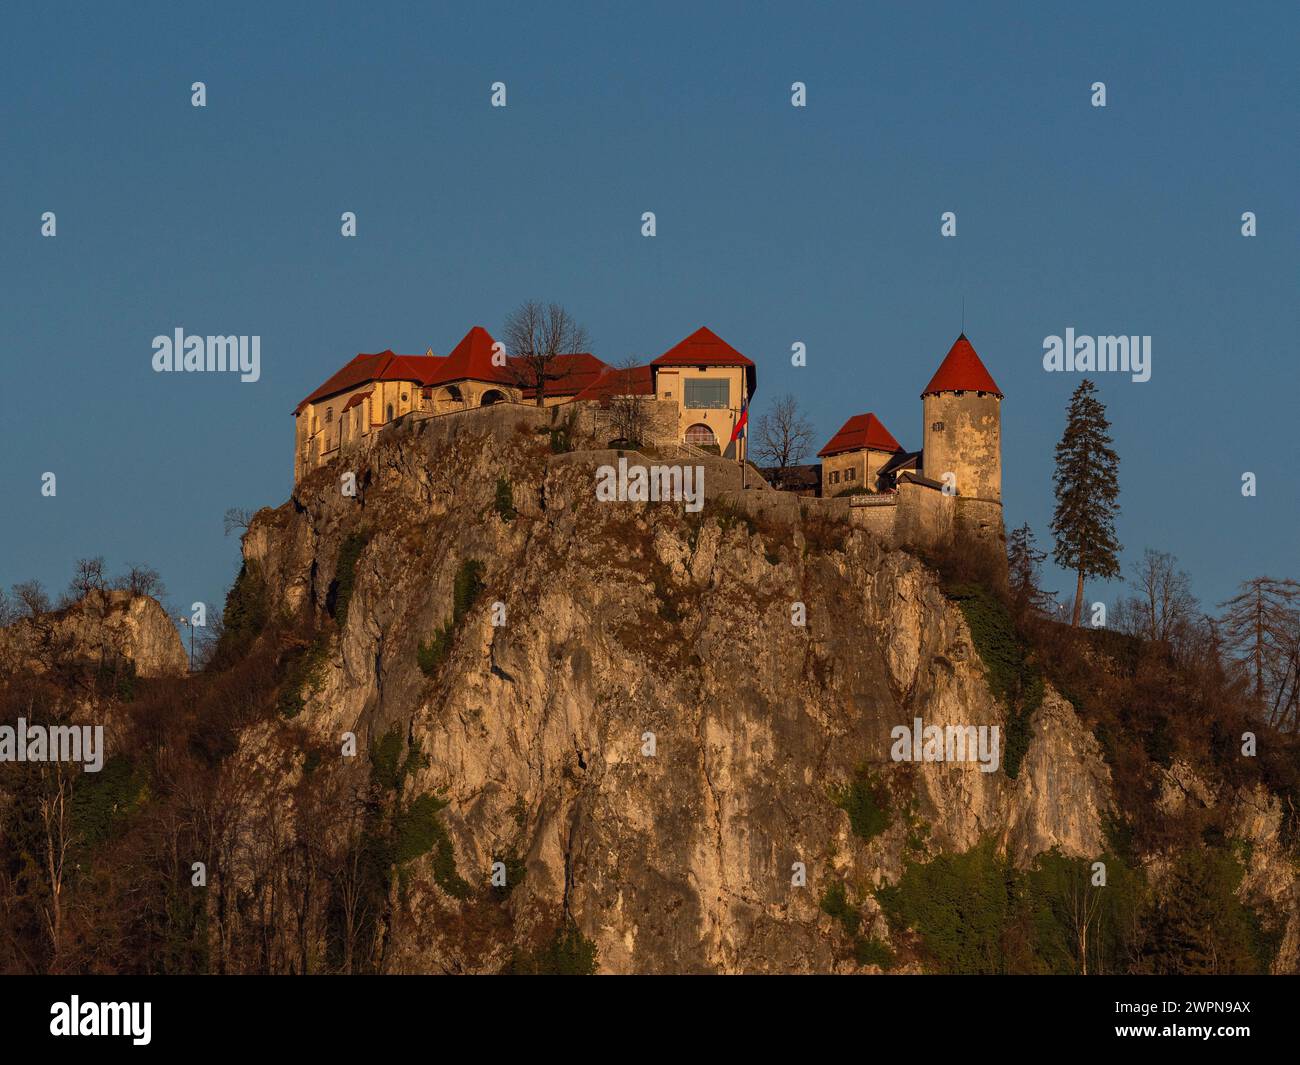 Bled Castle, originally called Veldes Castle, is a medieval hilltop castle near the Slovenian town of Bled. It rises on a 139-metre-high rock above Lake Bled and is considered the oldest castle in Slovenia. Stock Photo